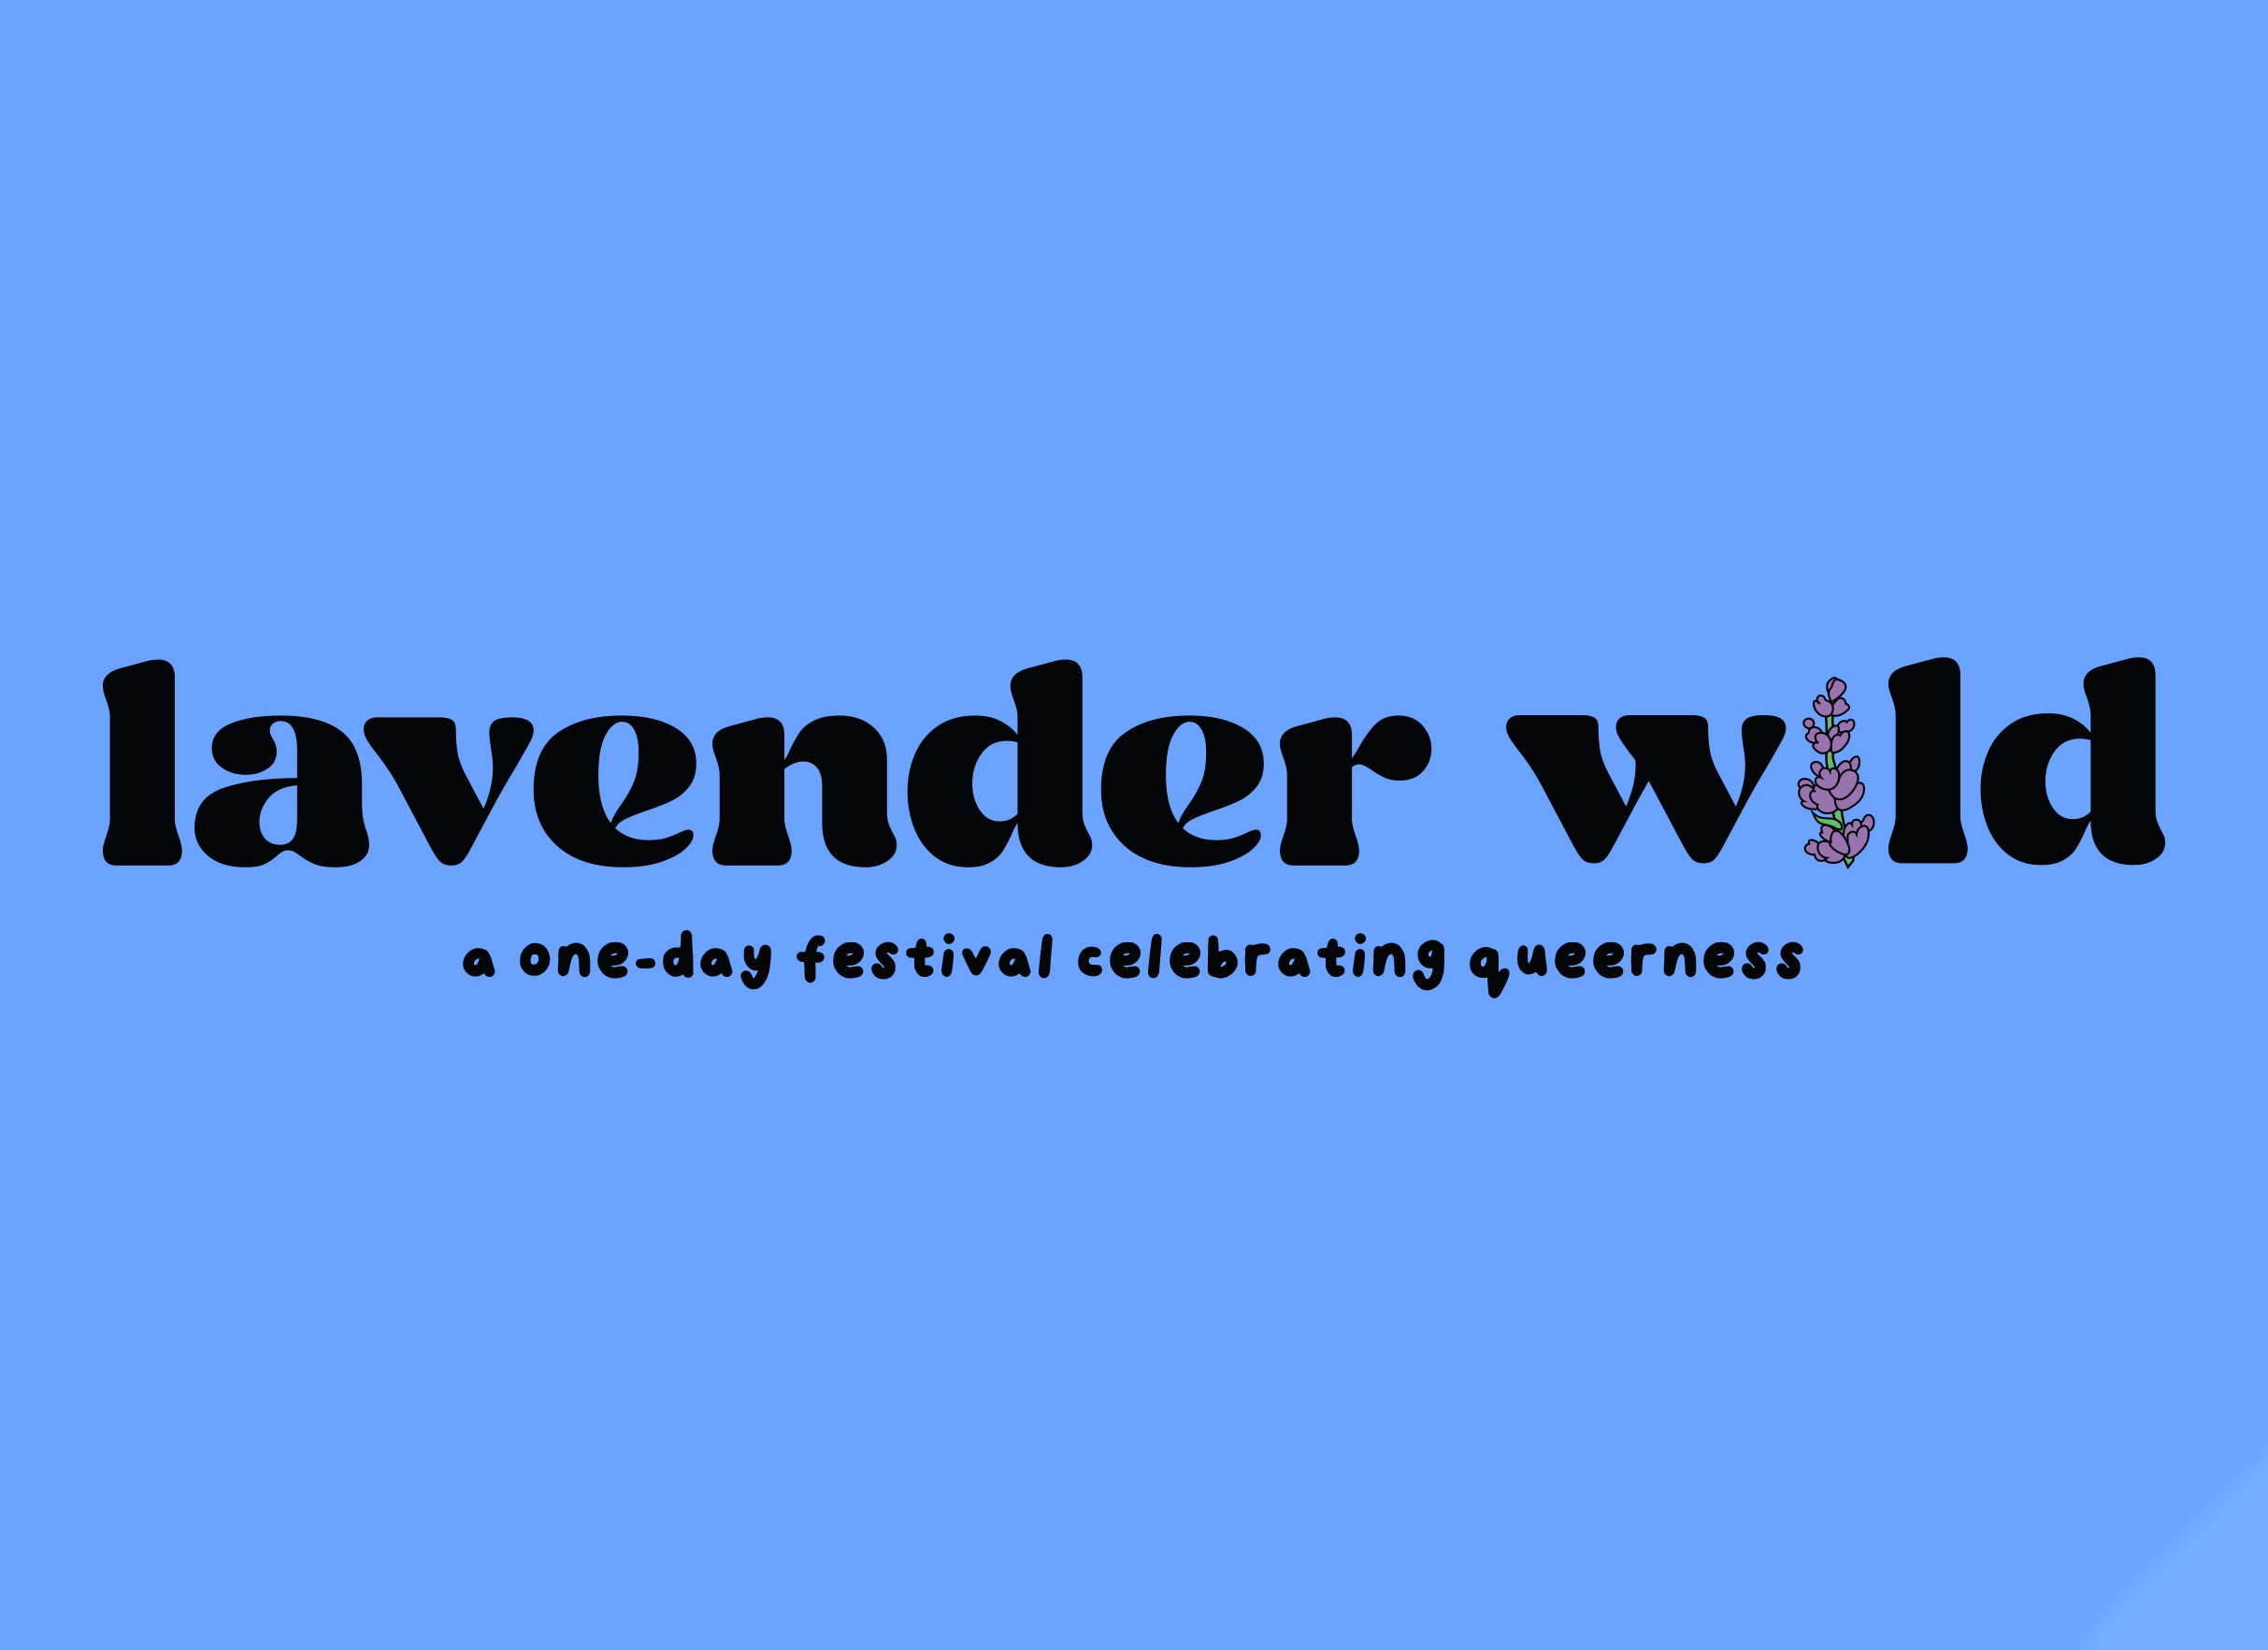 lavender wild: a one-day festival celebrating queerness in Toronto promo photo for Concert Week Festival Weekend Promotion presale offer code